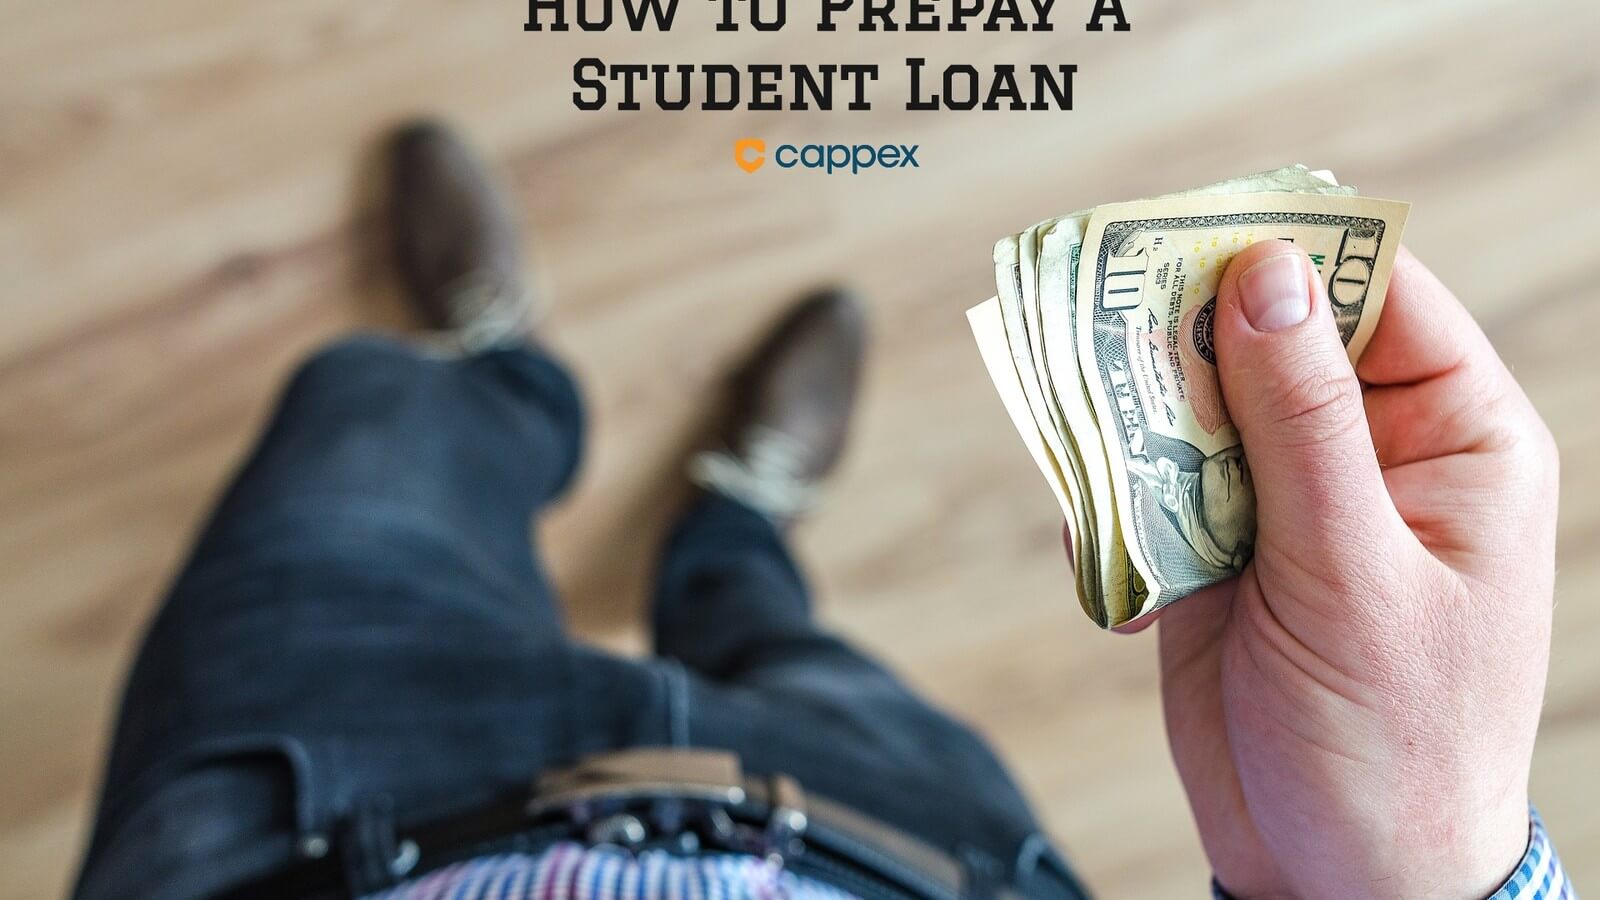 How to Prepay a Student Loan 